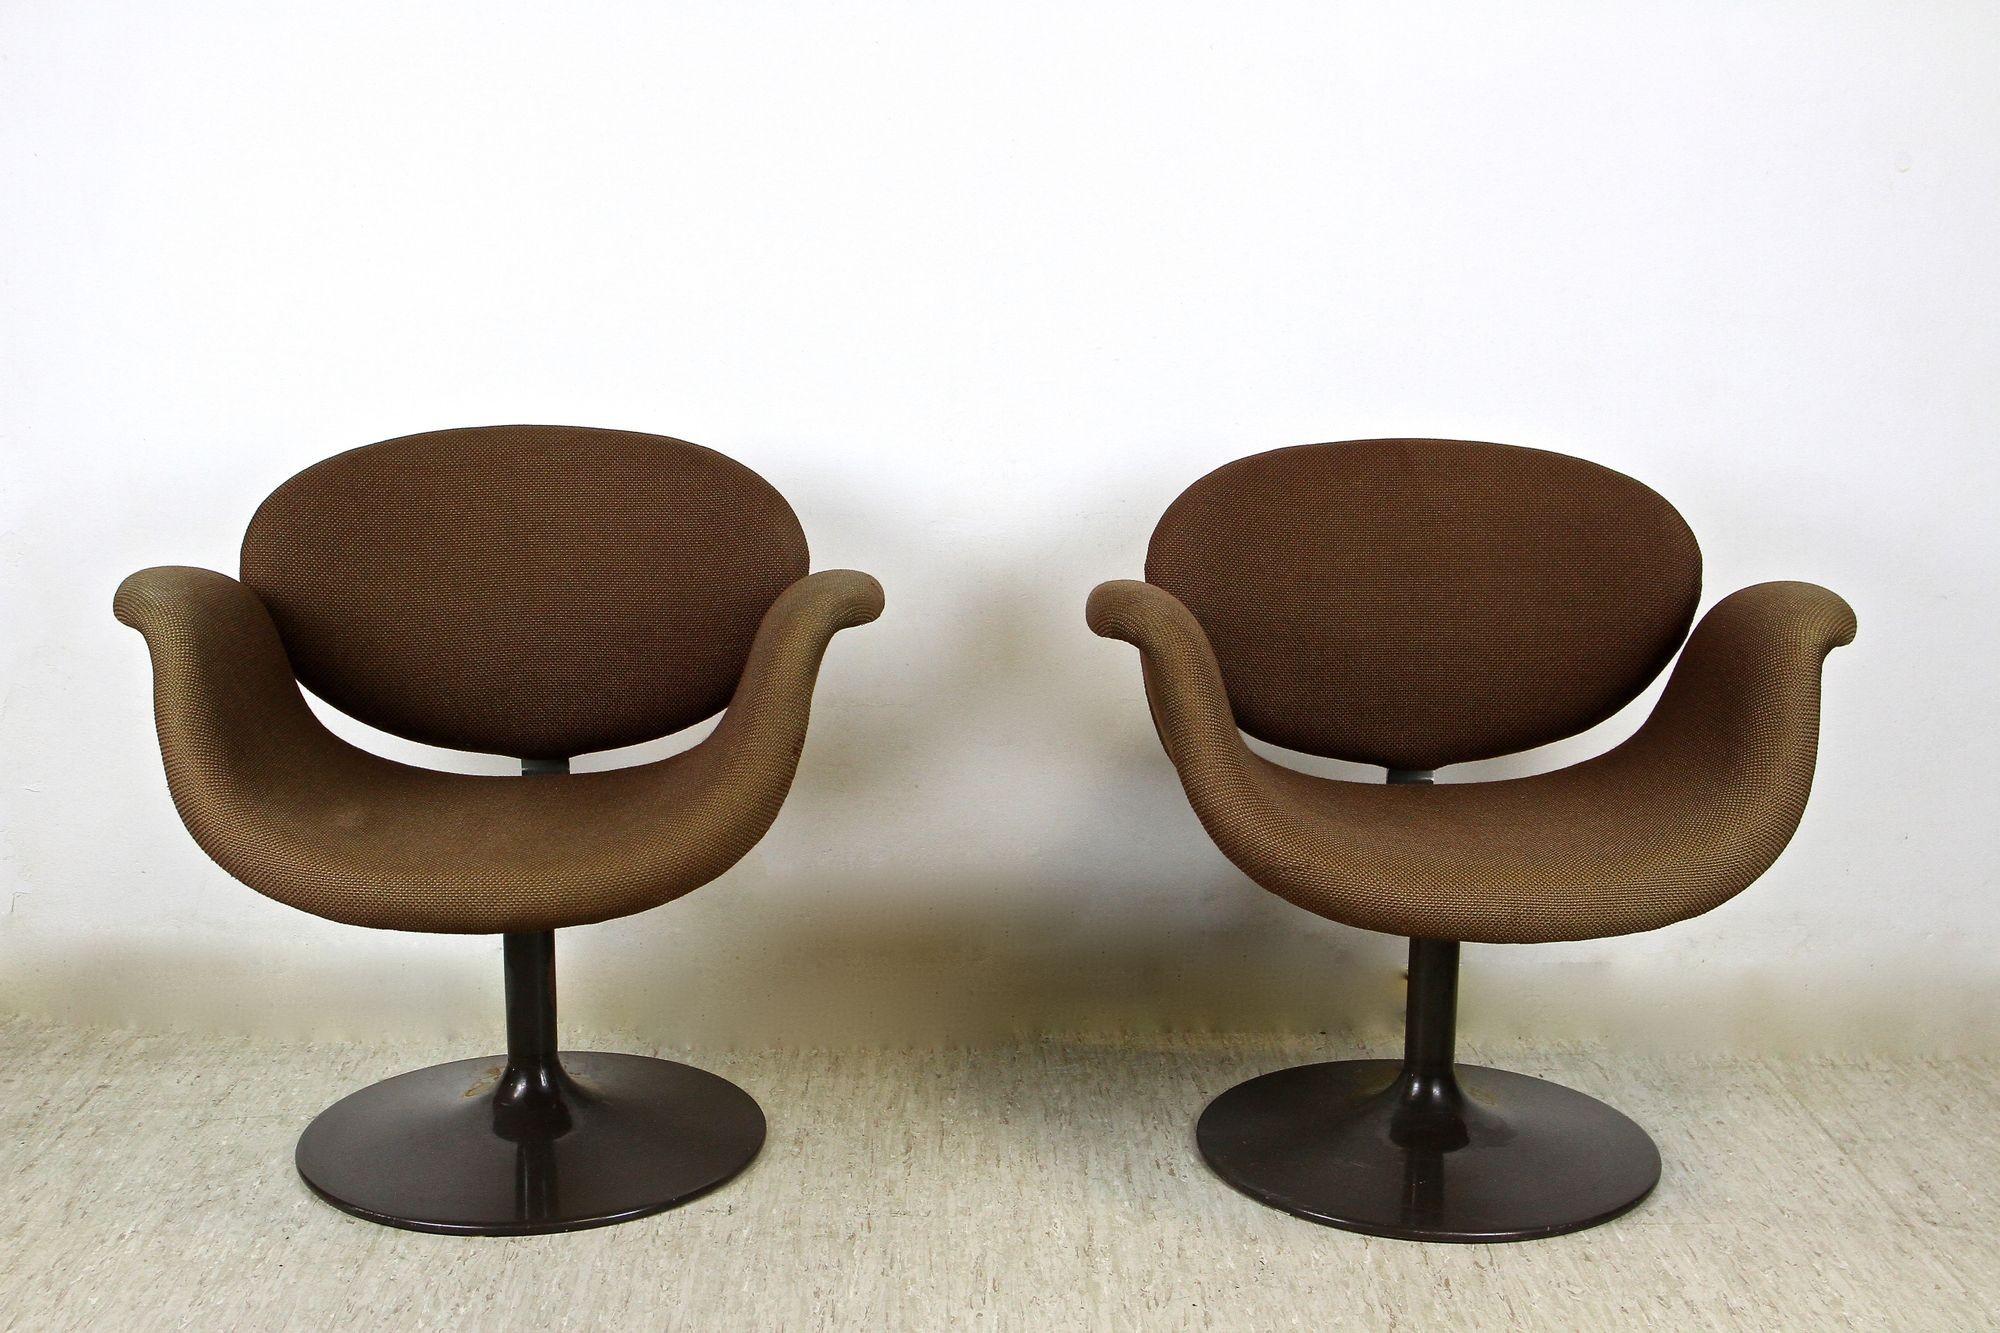 Beautiful pair of dark brown mid-century swivel Tulip armchairs by Pierre Paulin. Made around 1965, this design classic comes with the still original brown woven special fabric showing just a few very minimal abrasions. The fantastic shaped, unique